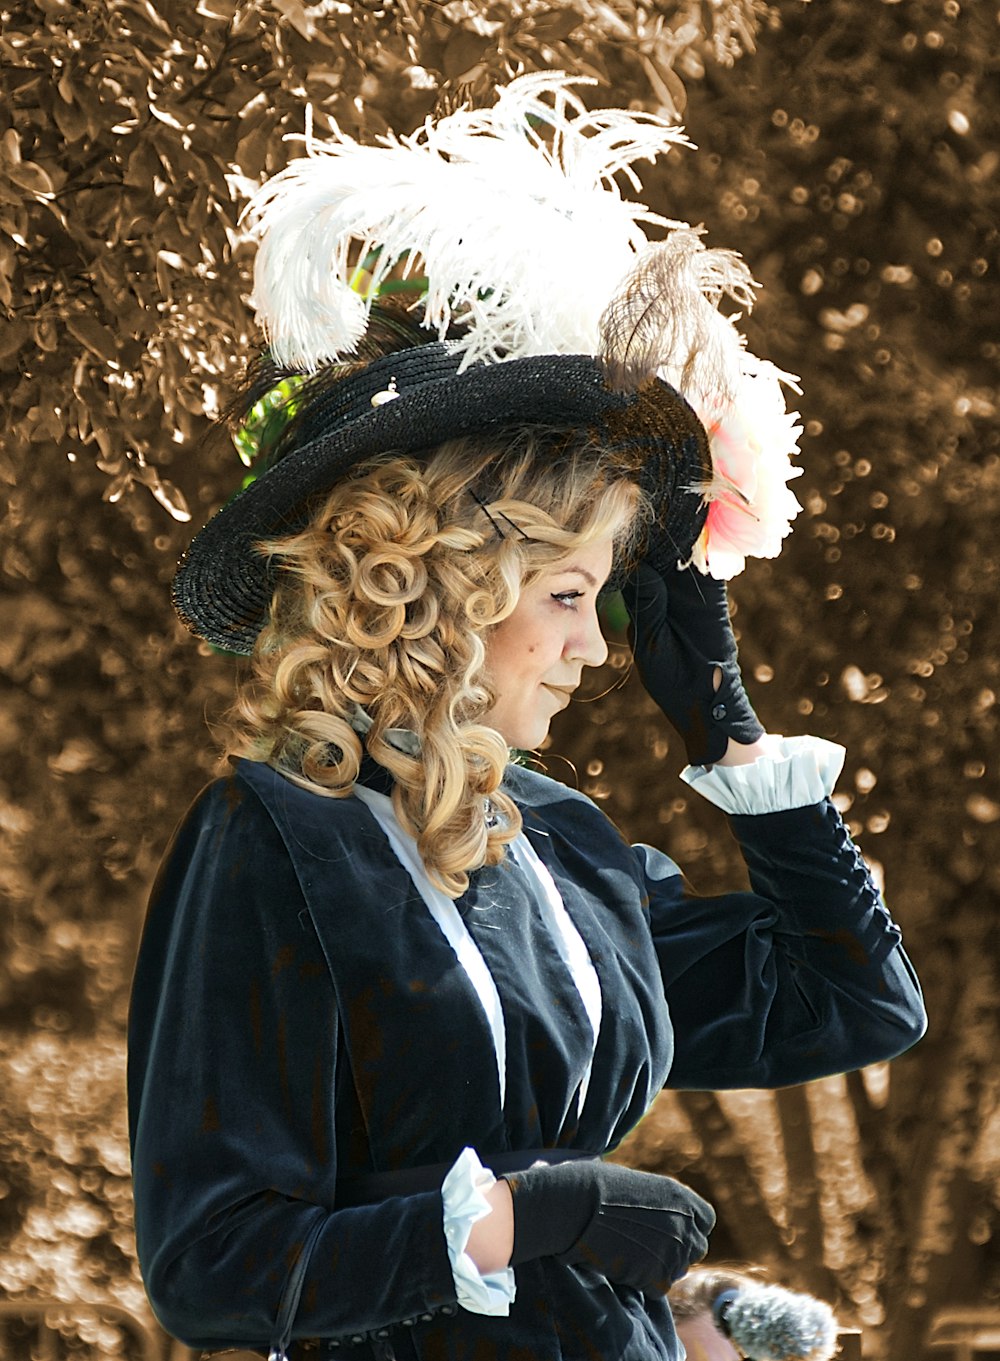 woman in black jacket and white floral headdress